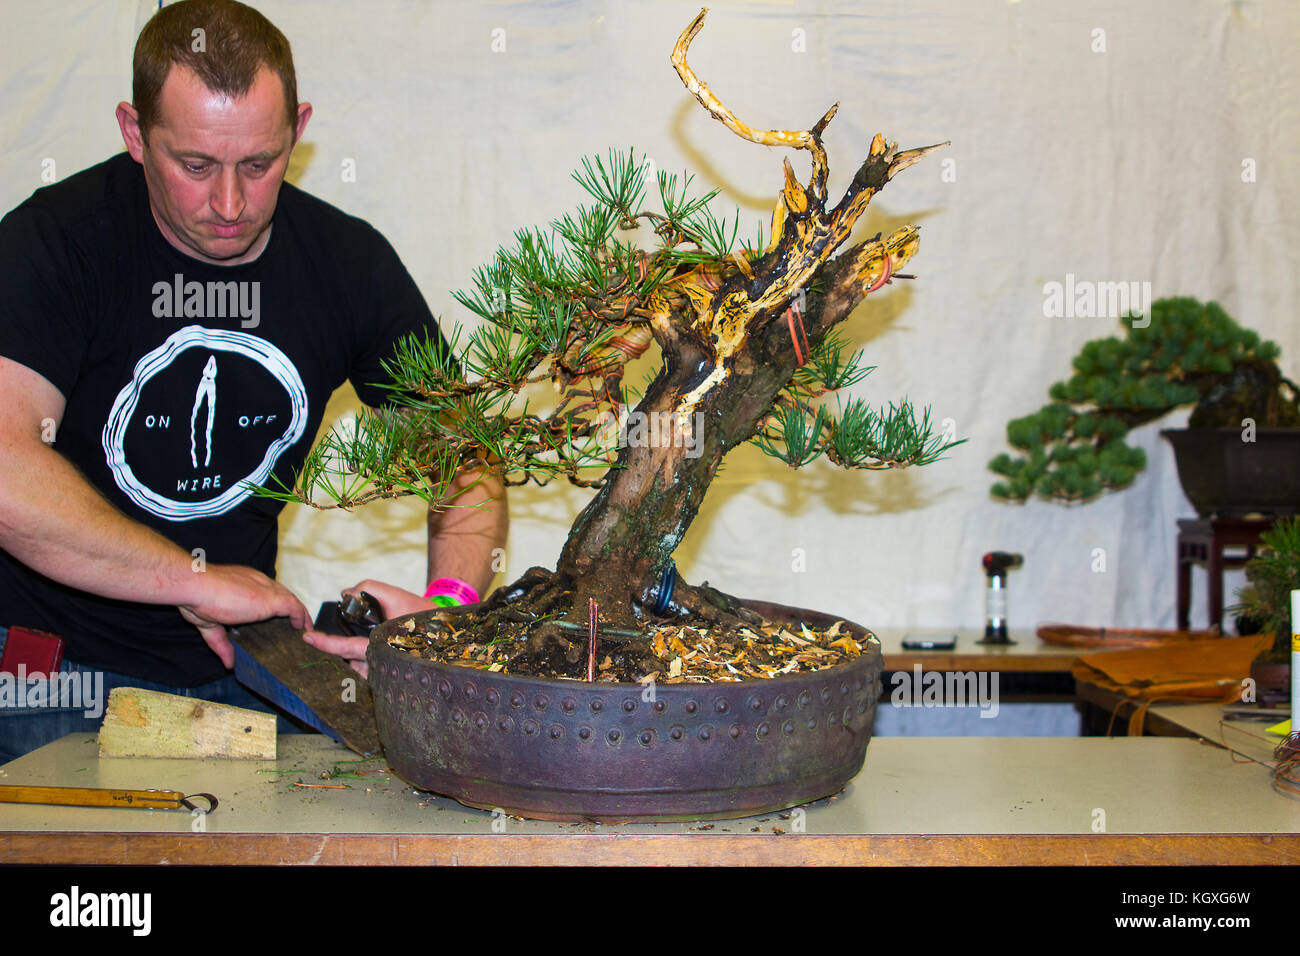 Philip Donnelly assisting Bjorn Bjorholm in the last stages of a bonsai styling demonstration held in Belfast Northern Ireland in November 2017 Stock Photo